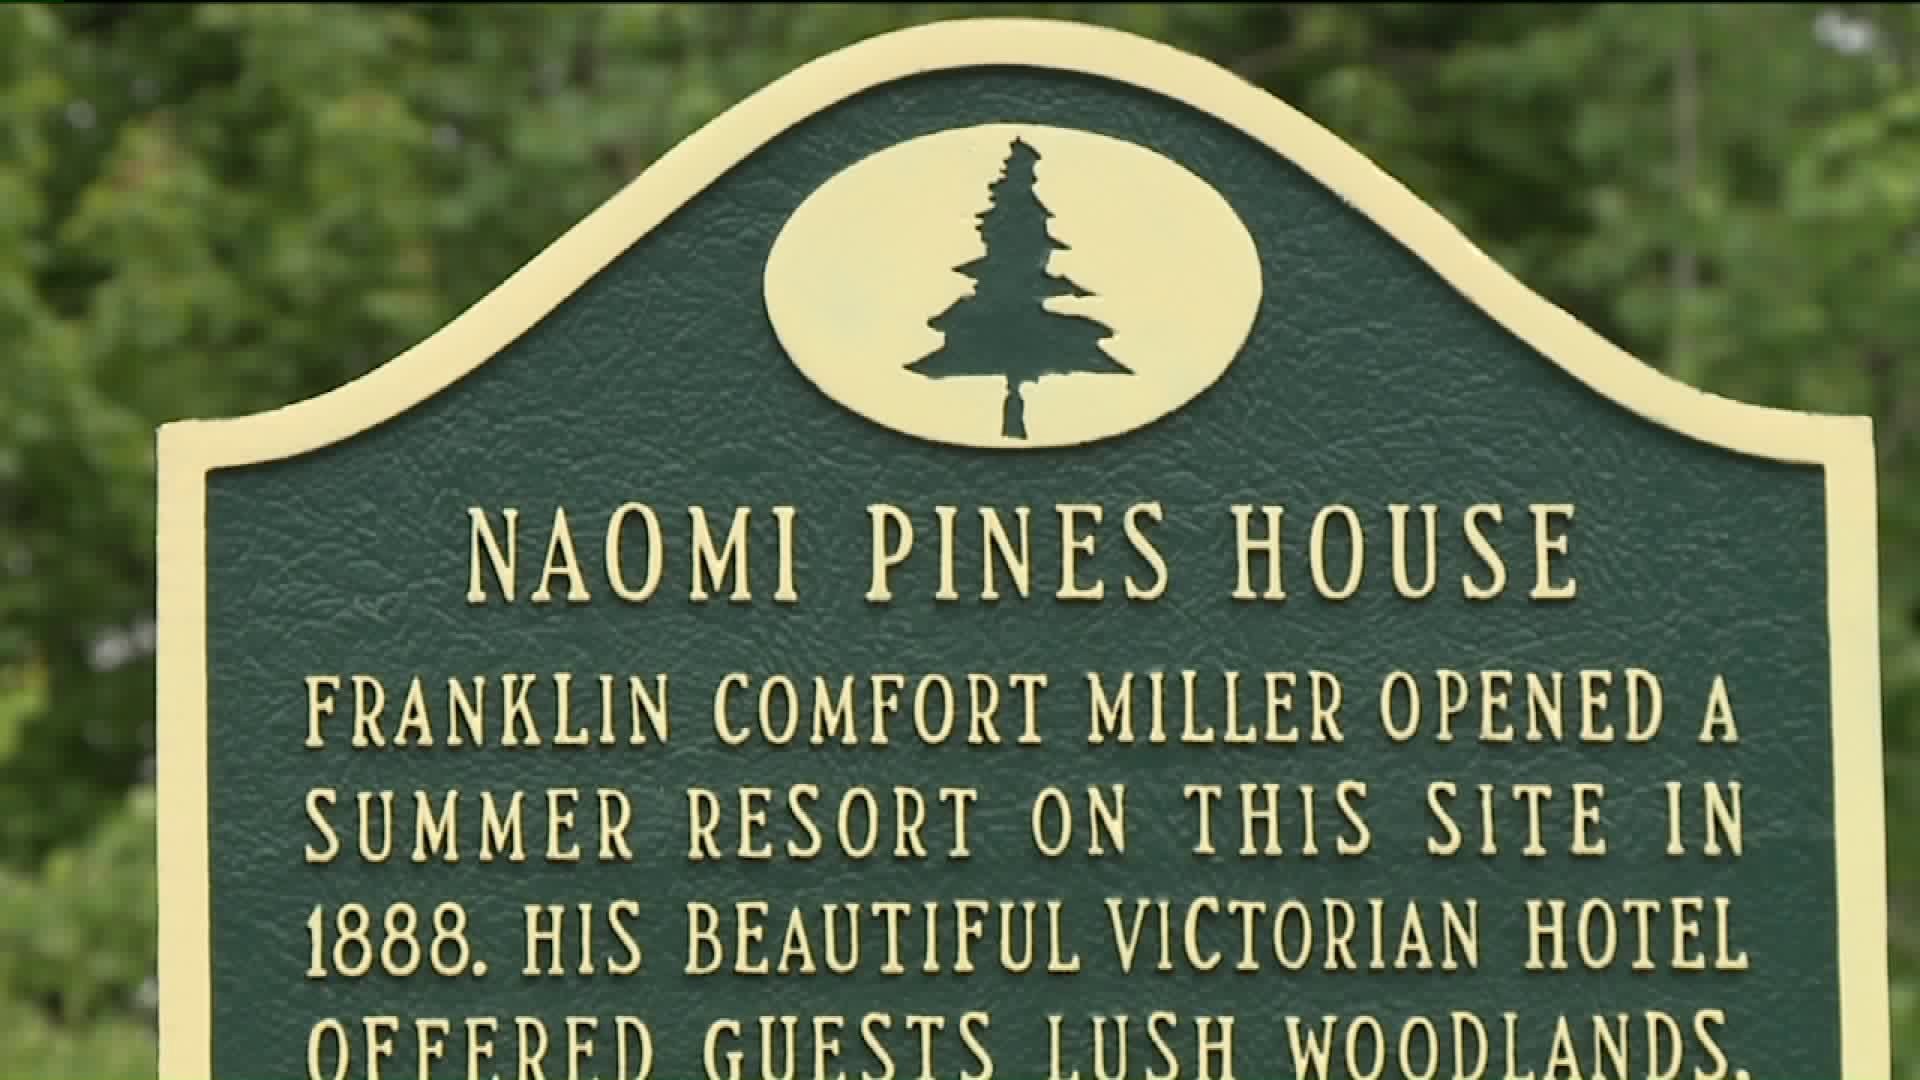 New Township Historical Marker in the Poconos Uses Modern Technology